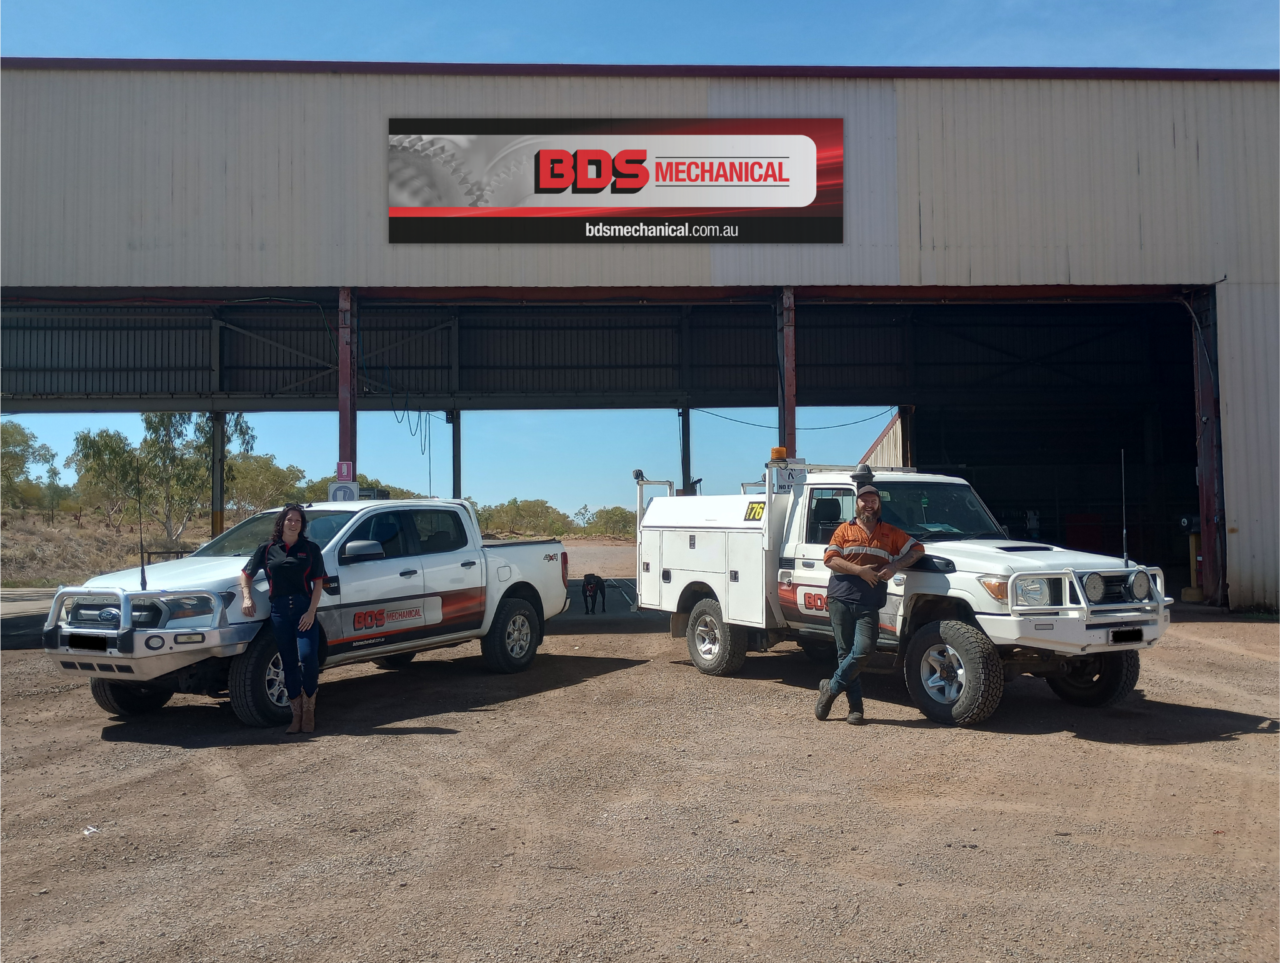 BDS Mechanical Cloncurry with diesel mechanics standing in front of the new workshop